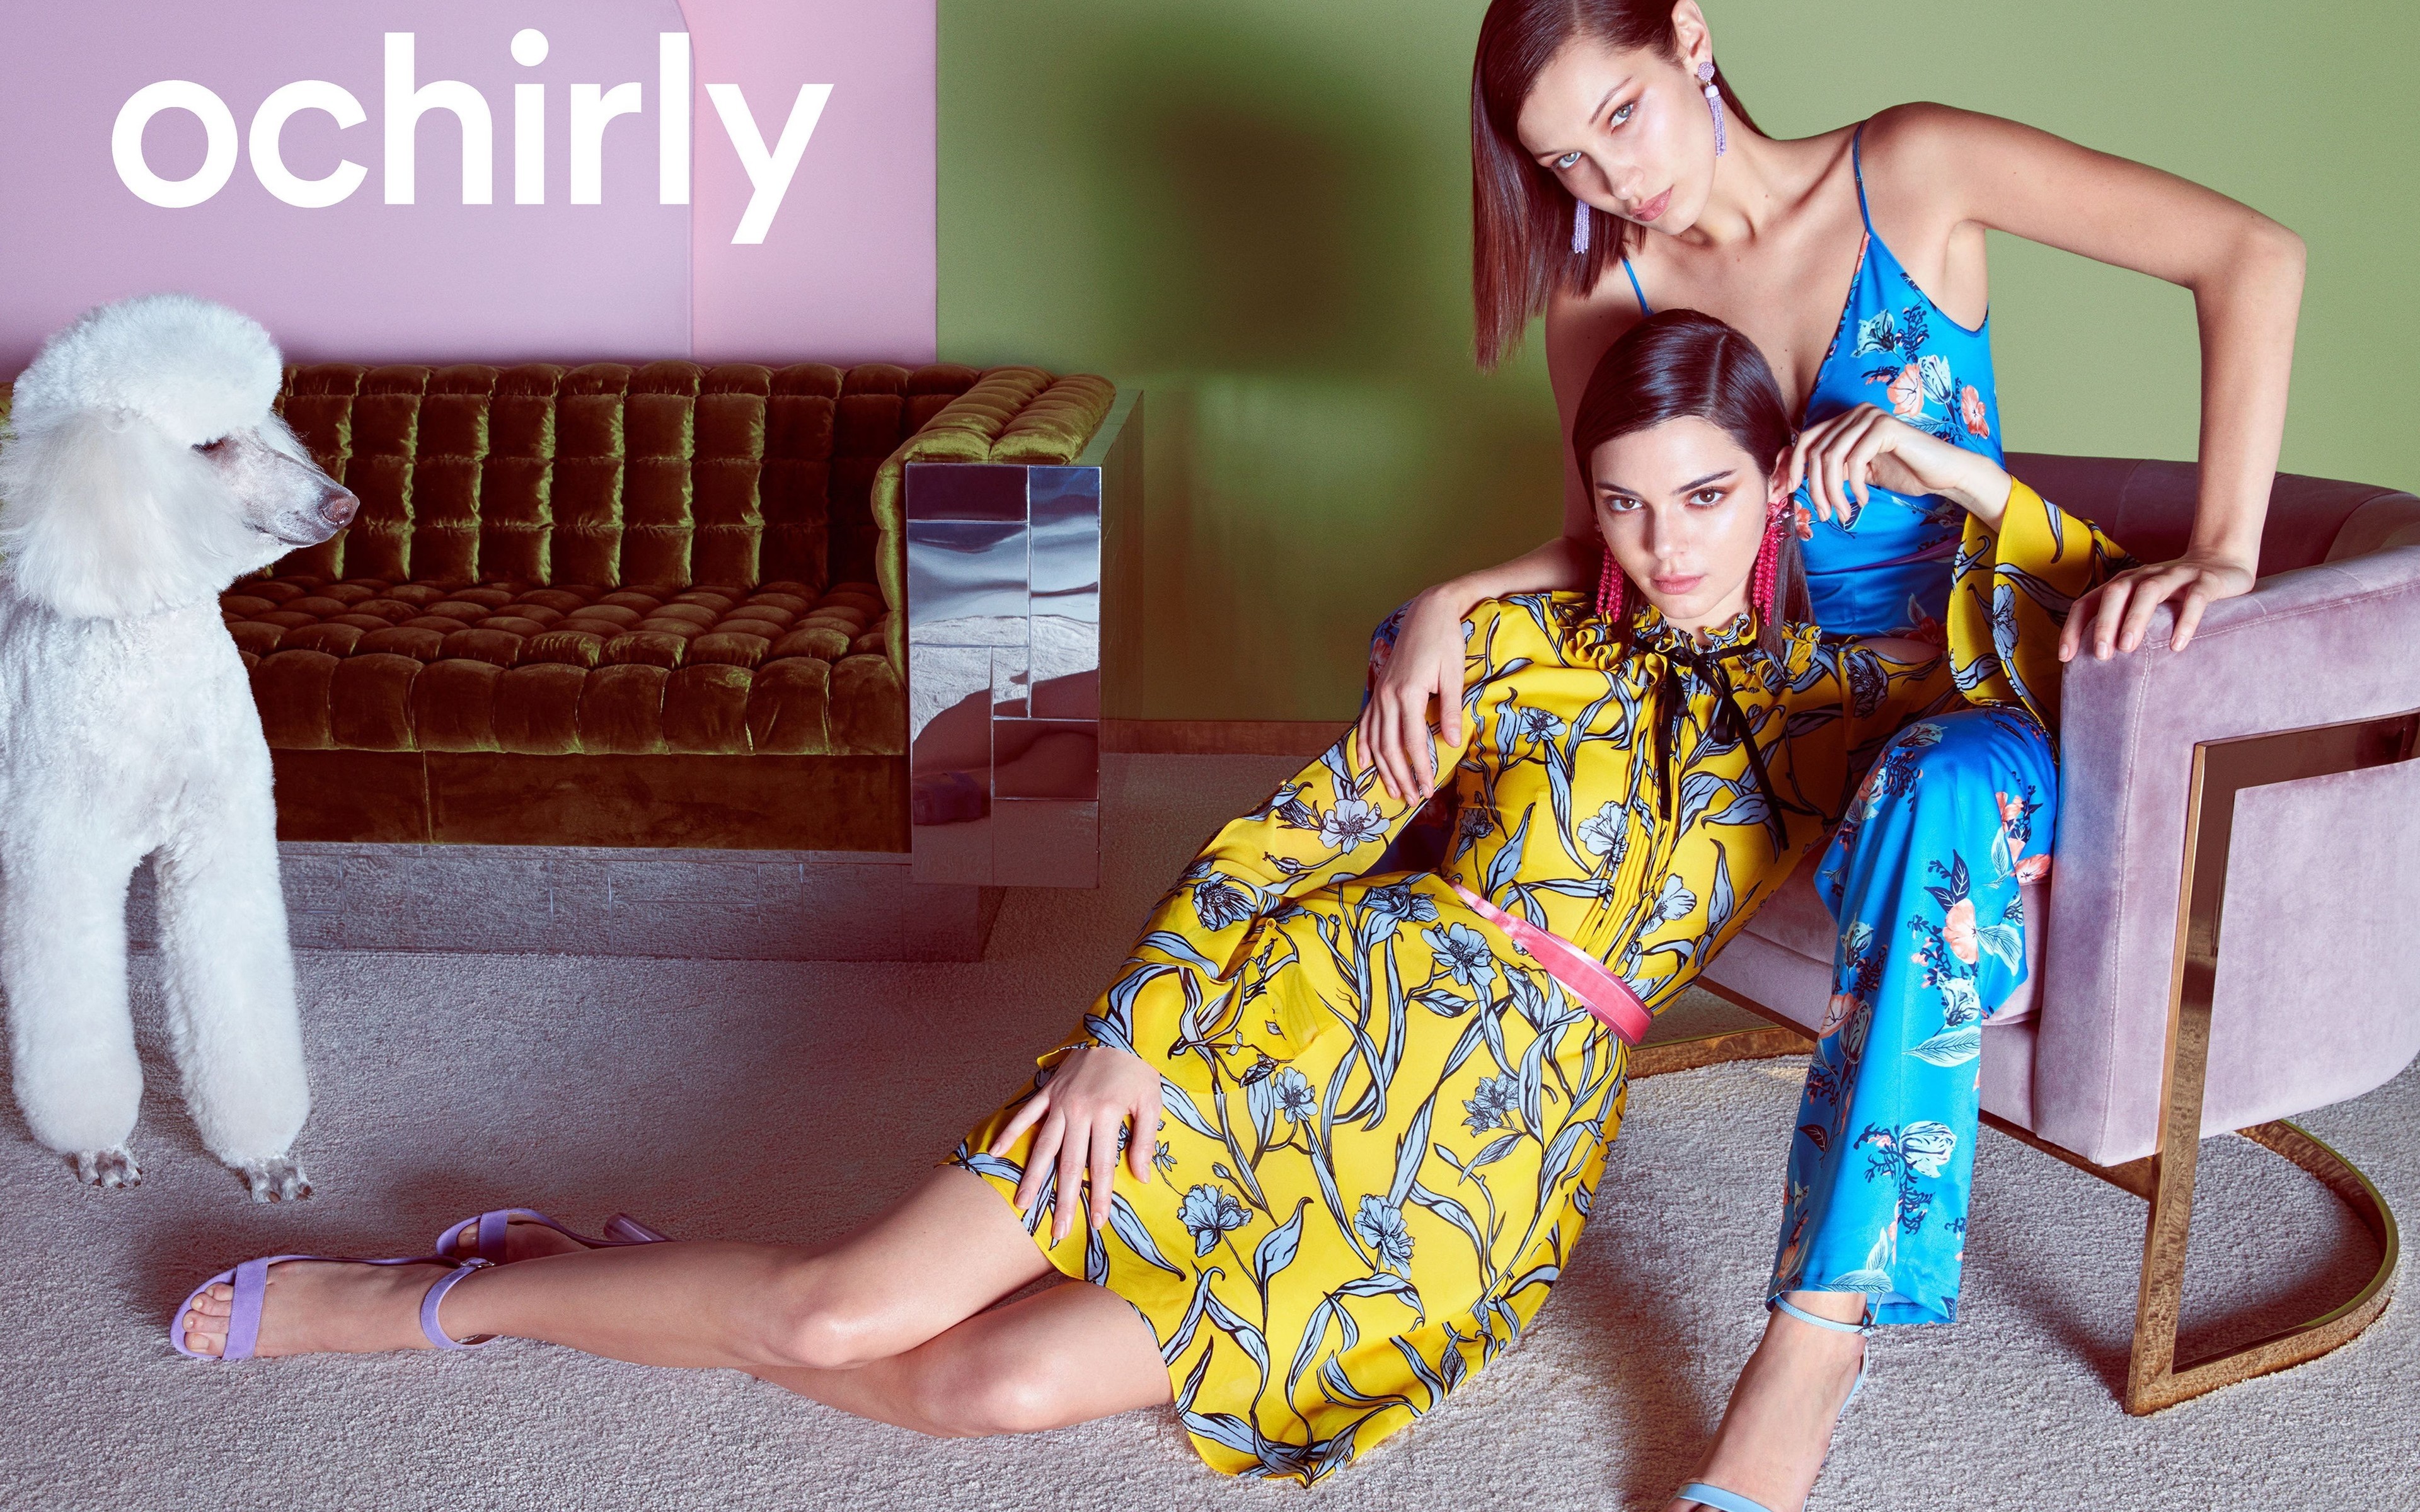 Kendall Jenner and Bella Hadid in an ad for Ochirly.